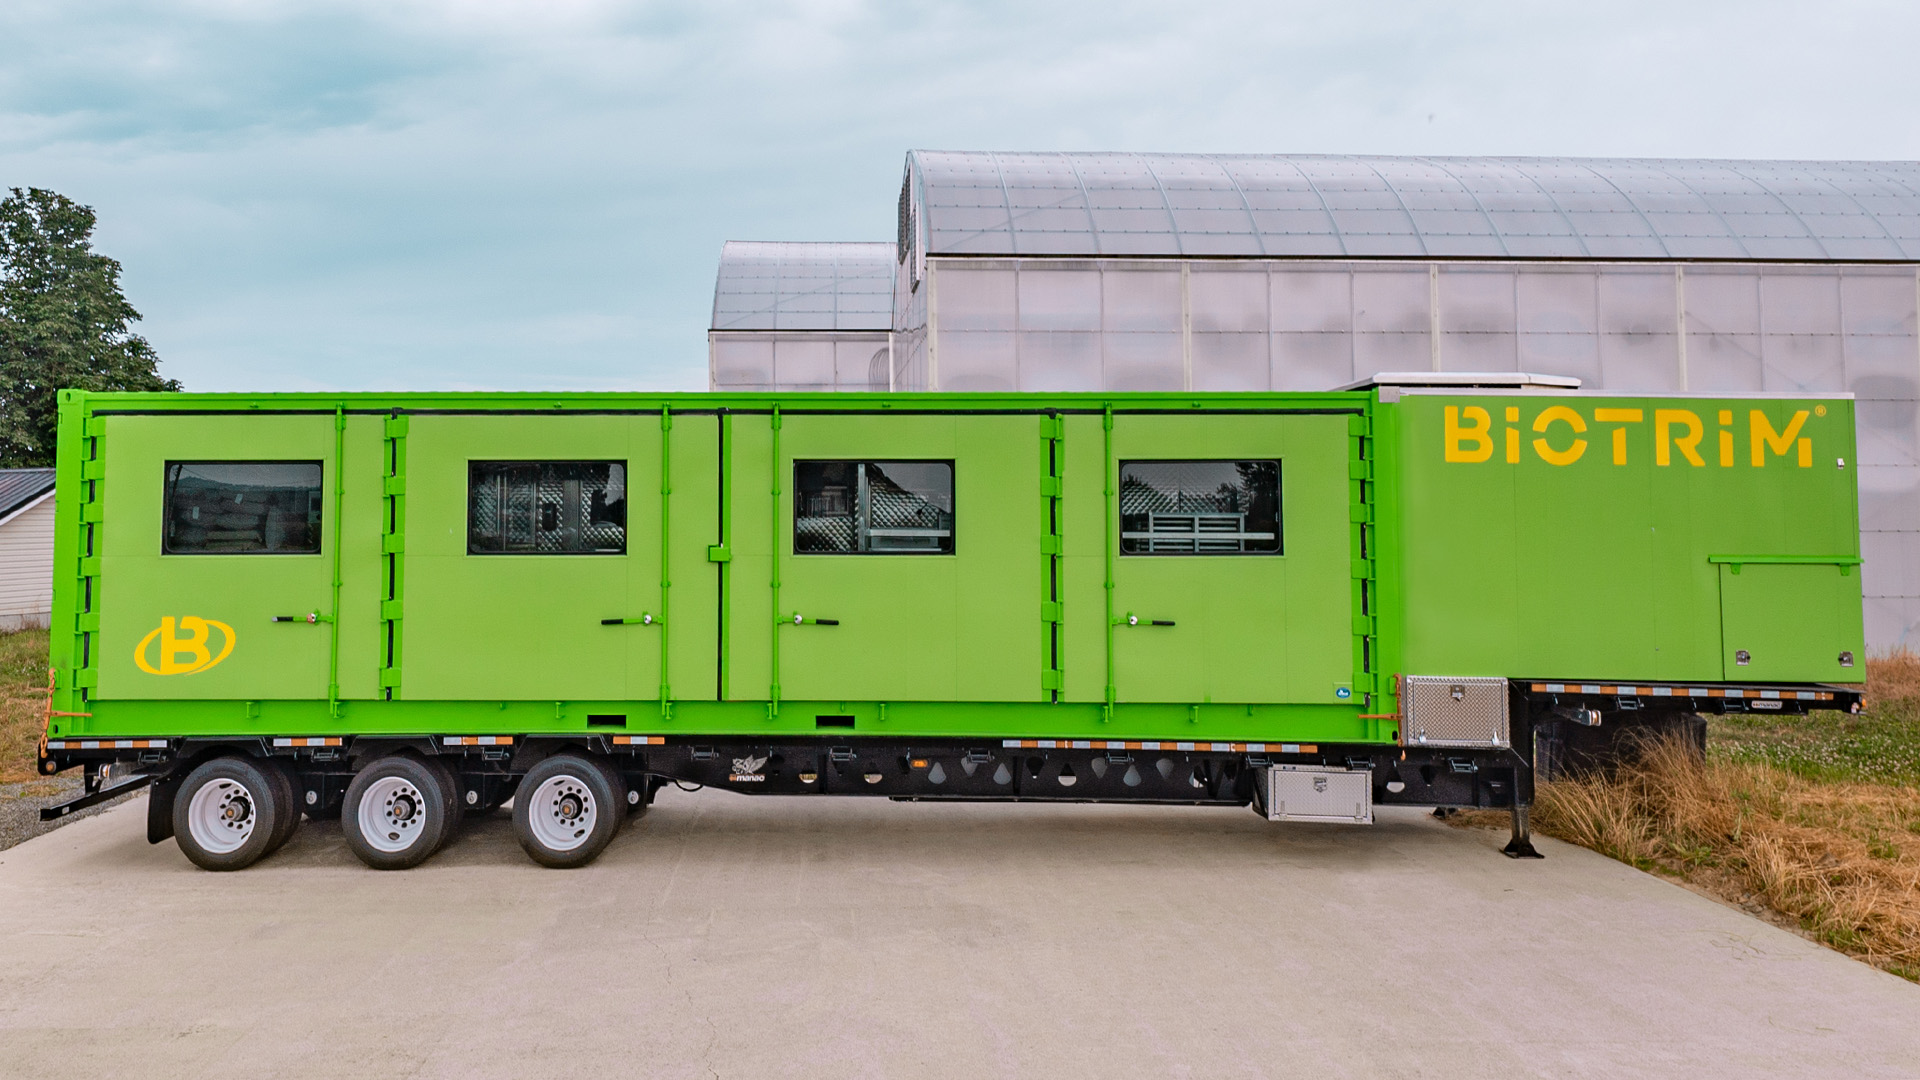 BioTrim: the World’s First Mobile Freeze Dry Unit of its Kind